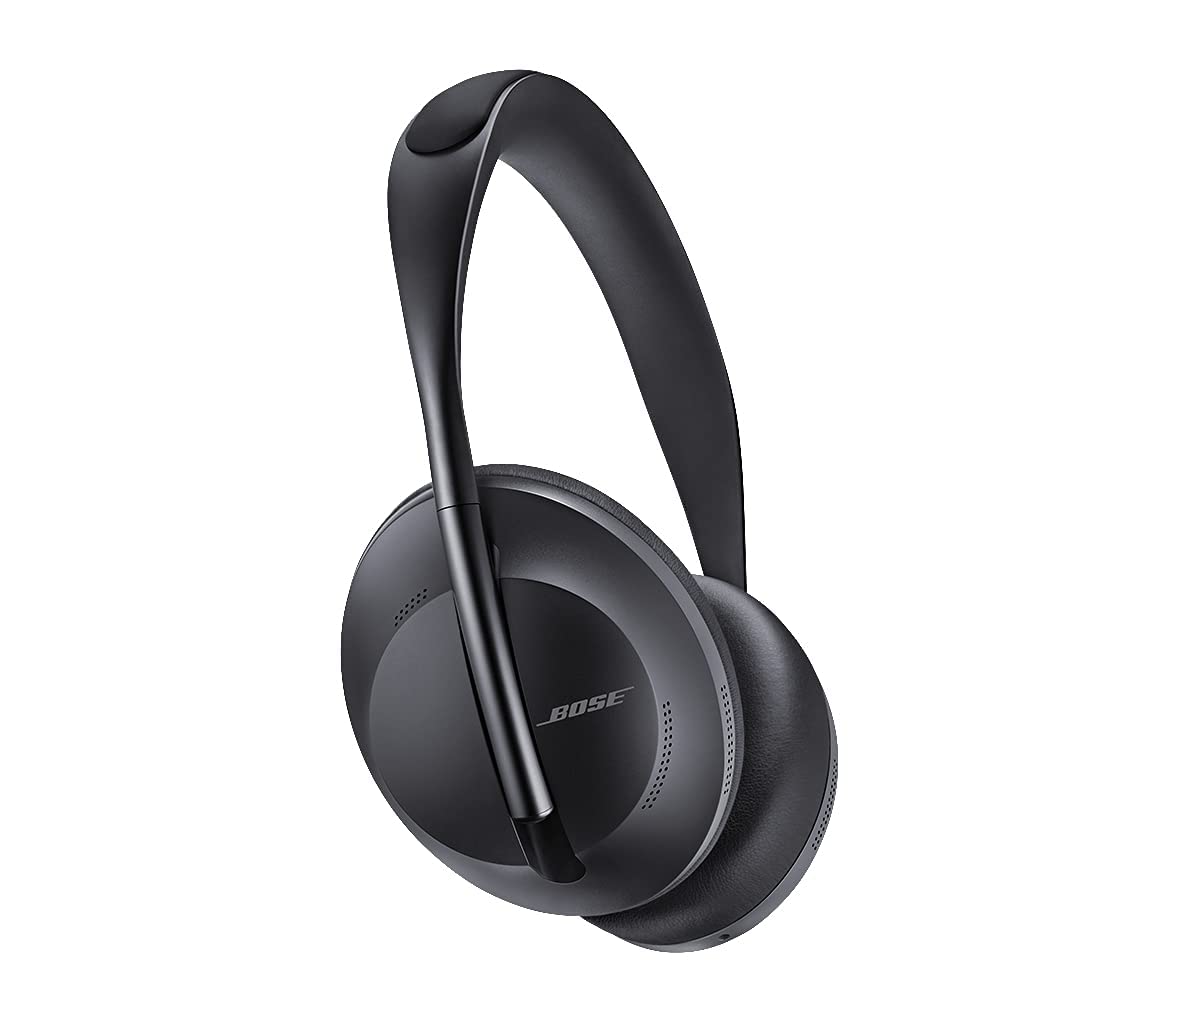 Bose Noise Cancelling Headphones 700,Bluetooth, Over-Ear Wireless with